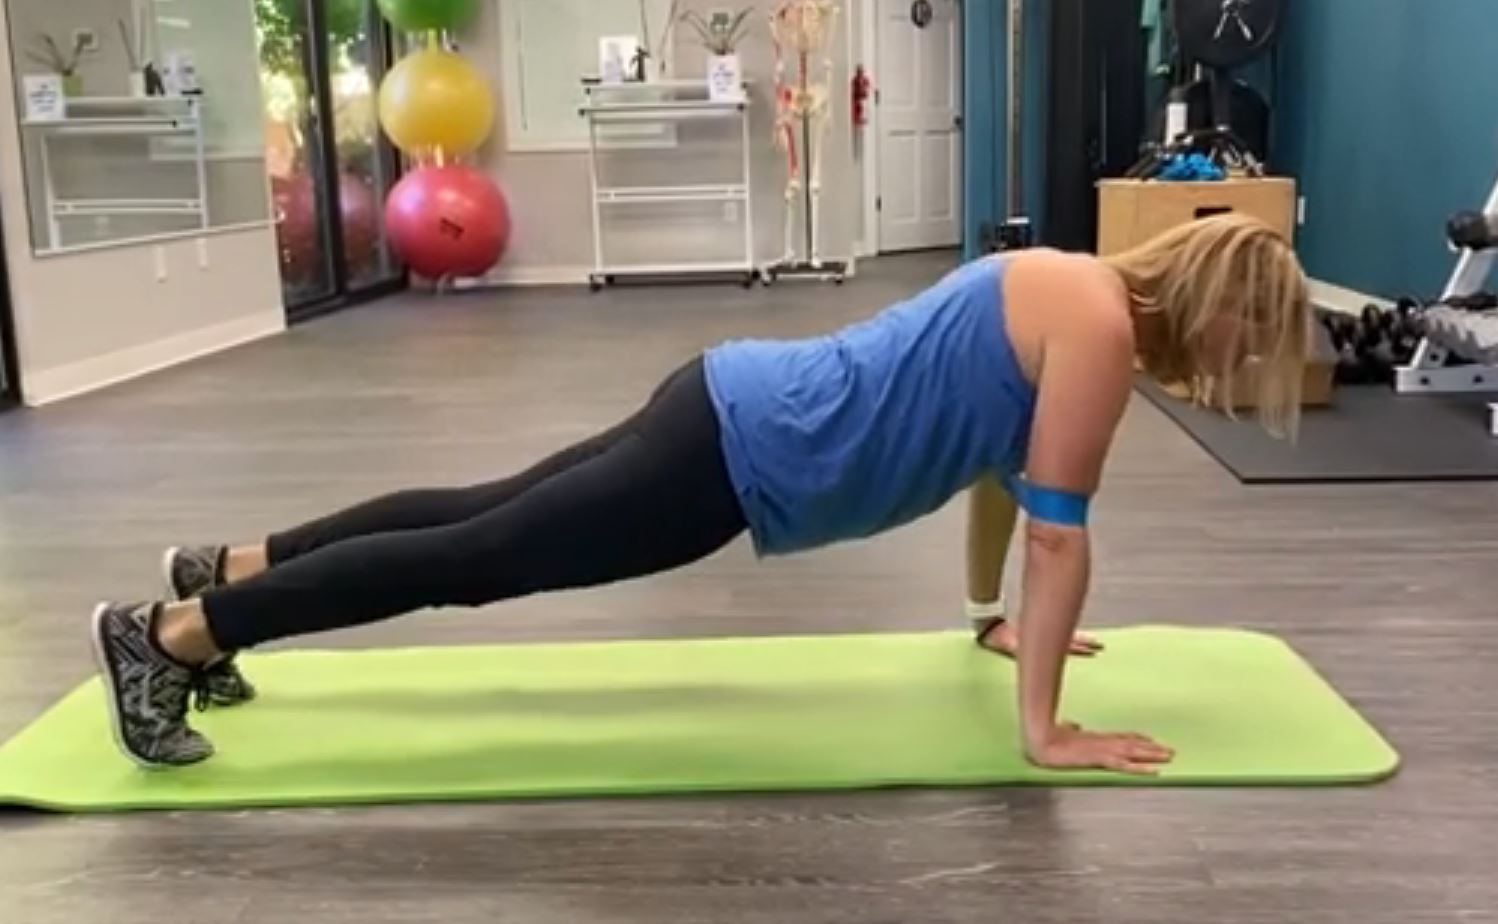 Reno Physical Therapist, Dr. Danielle Littoff, DPT demonstrates proper form for a push up